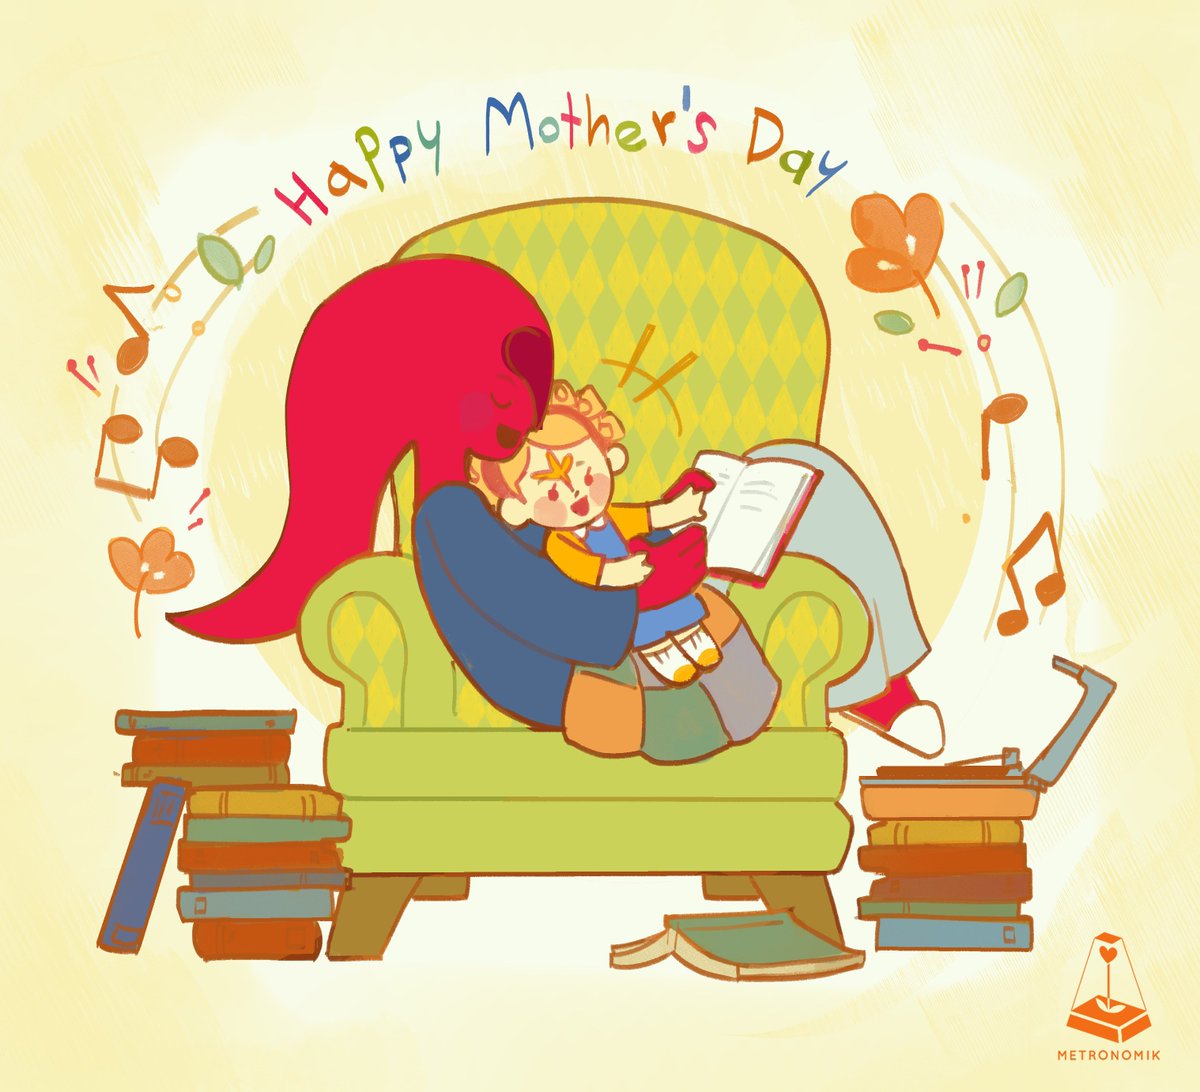 To all the real-life heroes who rock our world every day, Happy Mother's Day 💖💐from Metronomik! Let's strum a chord of gratitude for all the love 🥰 and support our moms give us.

Credit: Concept Artist - Revva @inconyoo 

#metronomik #nostraightroads #videogames #MothersDay